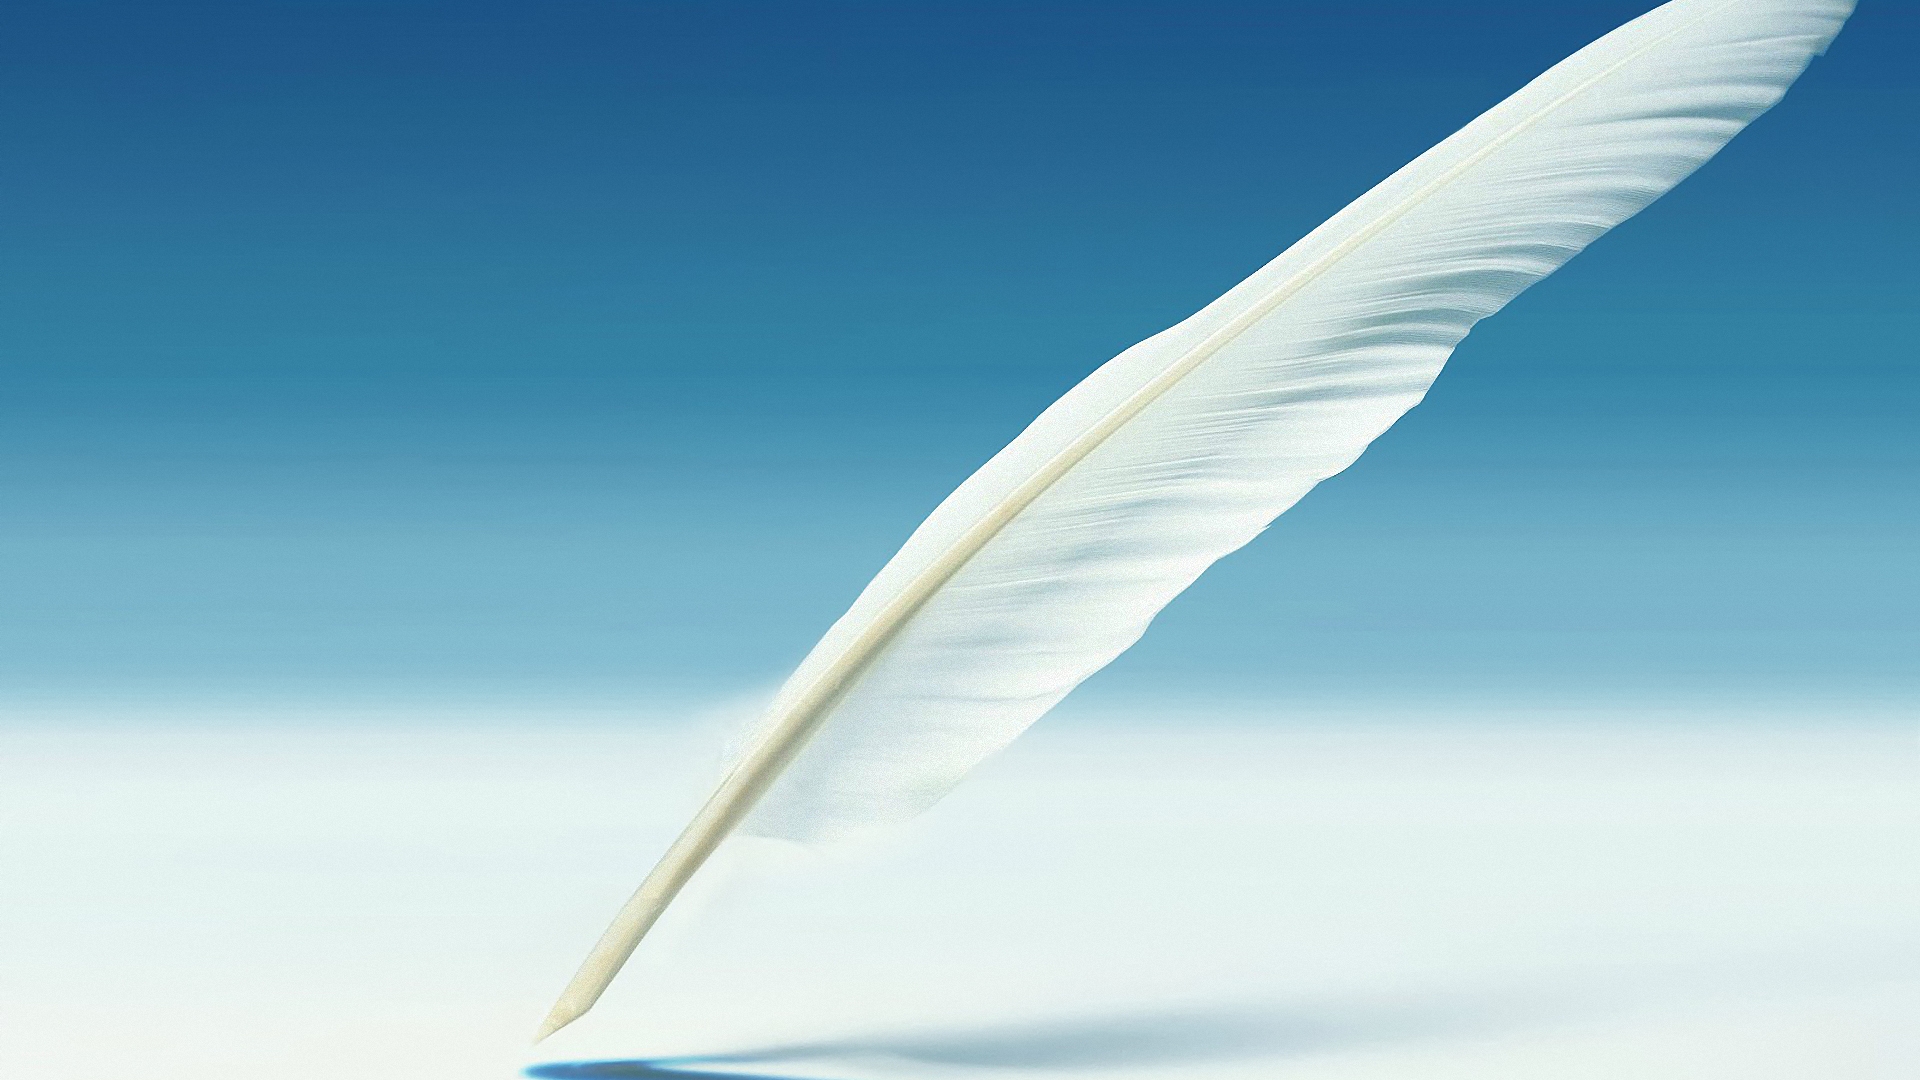 Feather Pen for 1920 x 1080 HDTV 1080p resolution